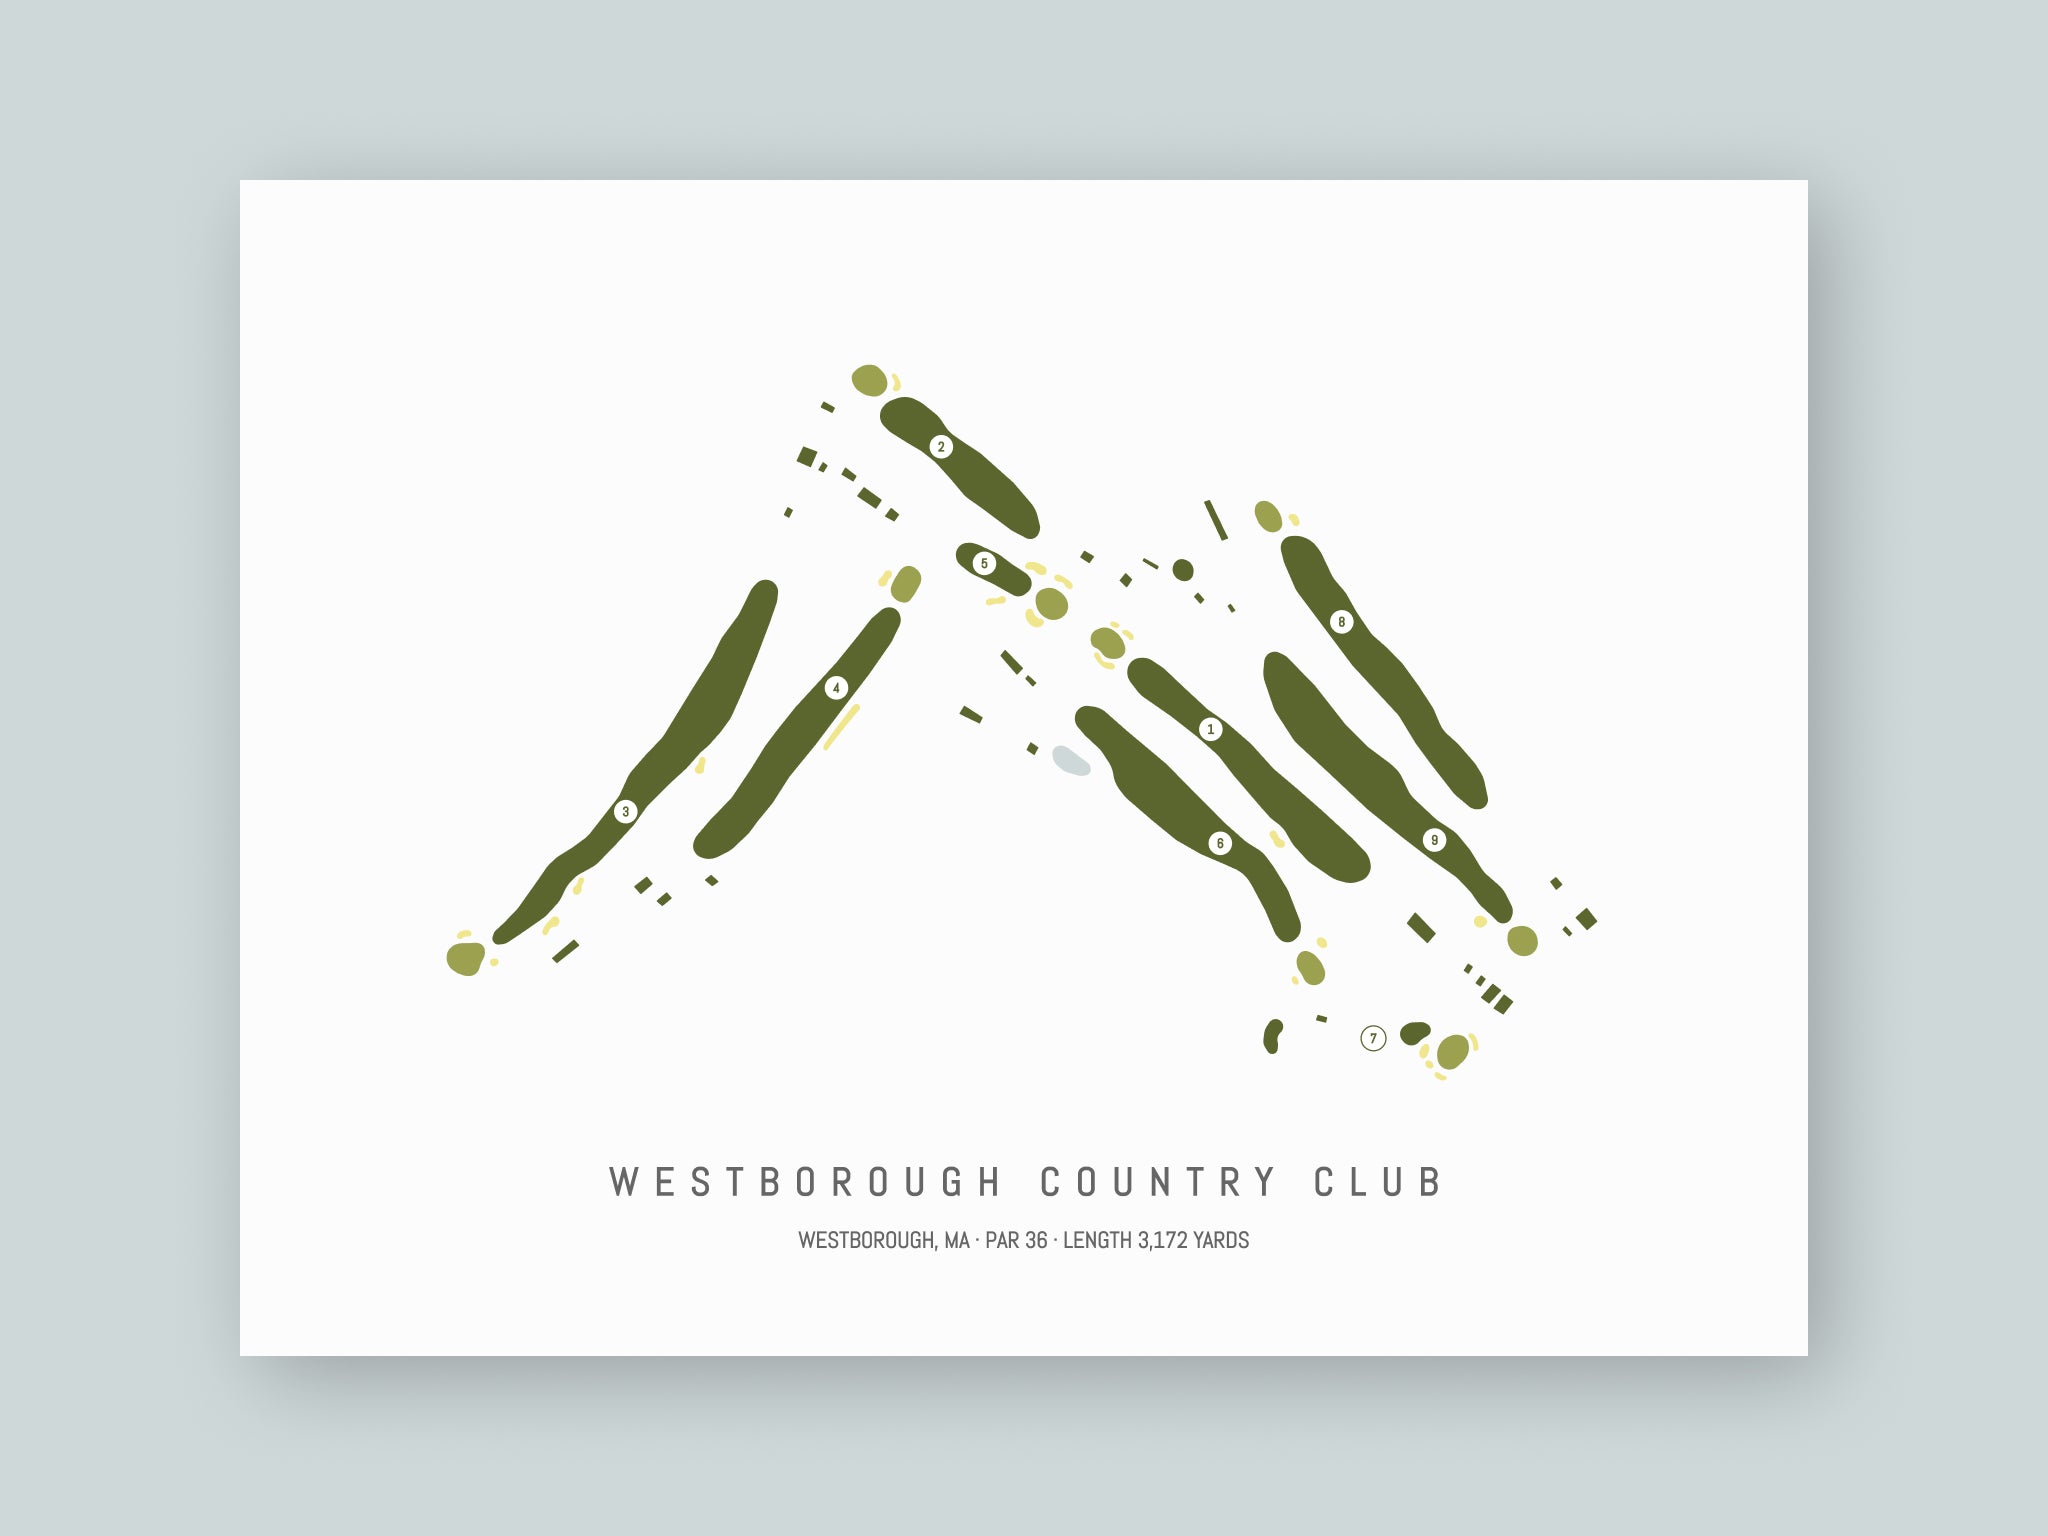 Westborough-Country-Club-MA--Unframed-24x18-With-Hole-Numbers